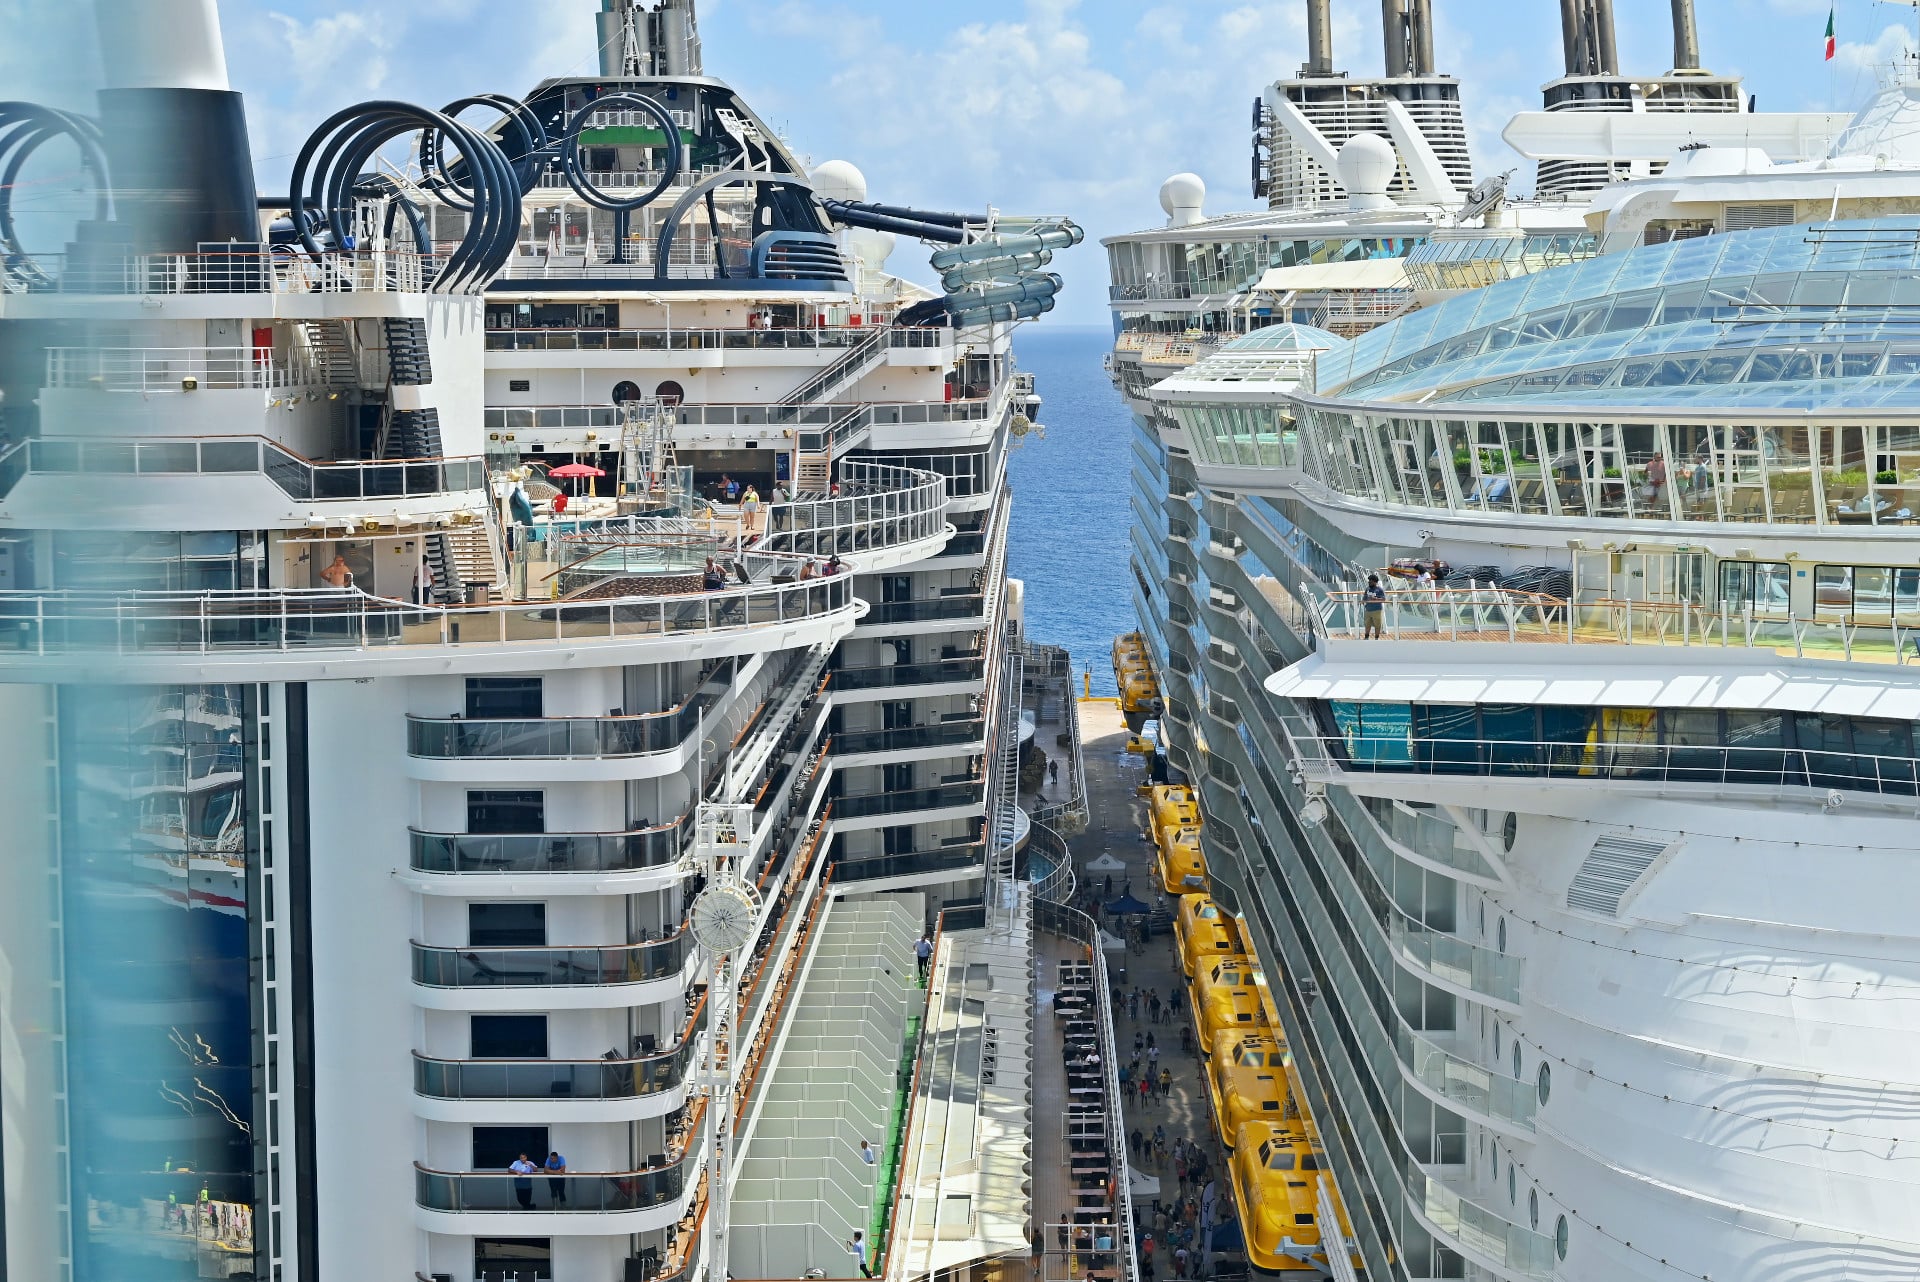 Two cruise ships, MSC Seaside and Allure of the Seas in cruise port